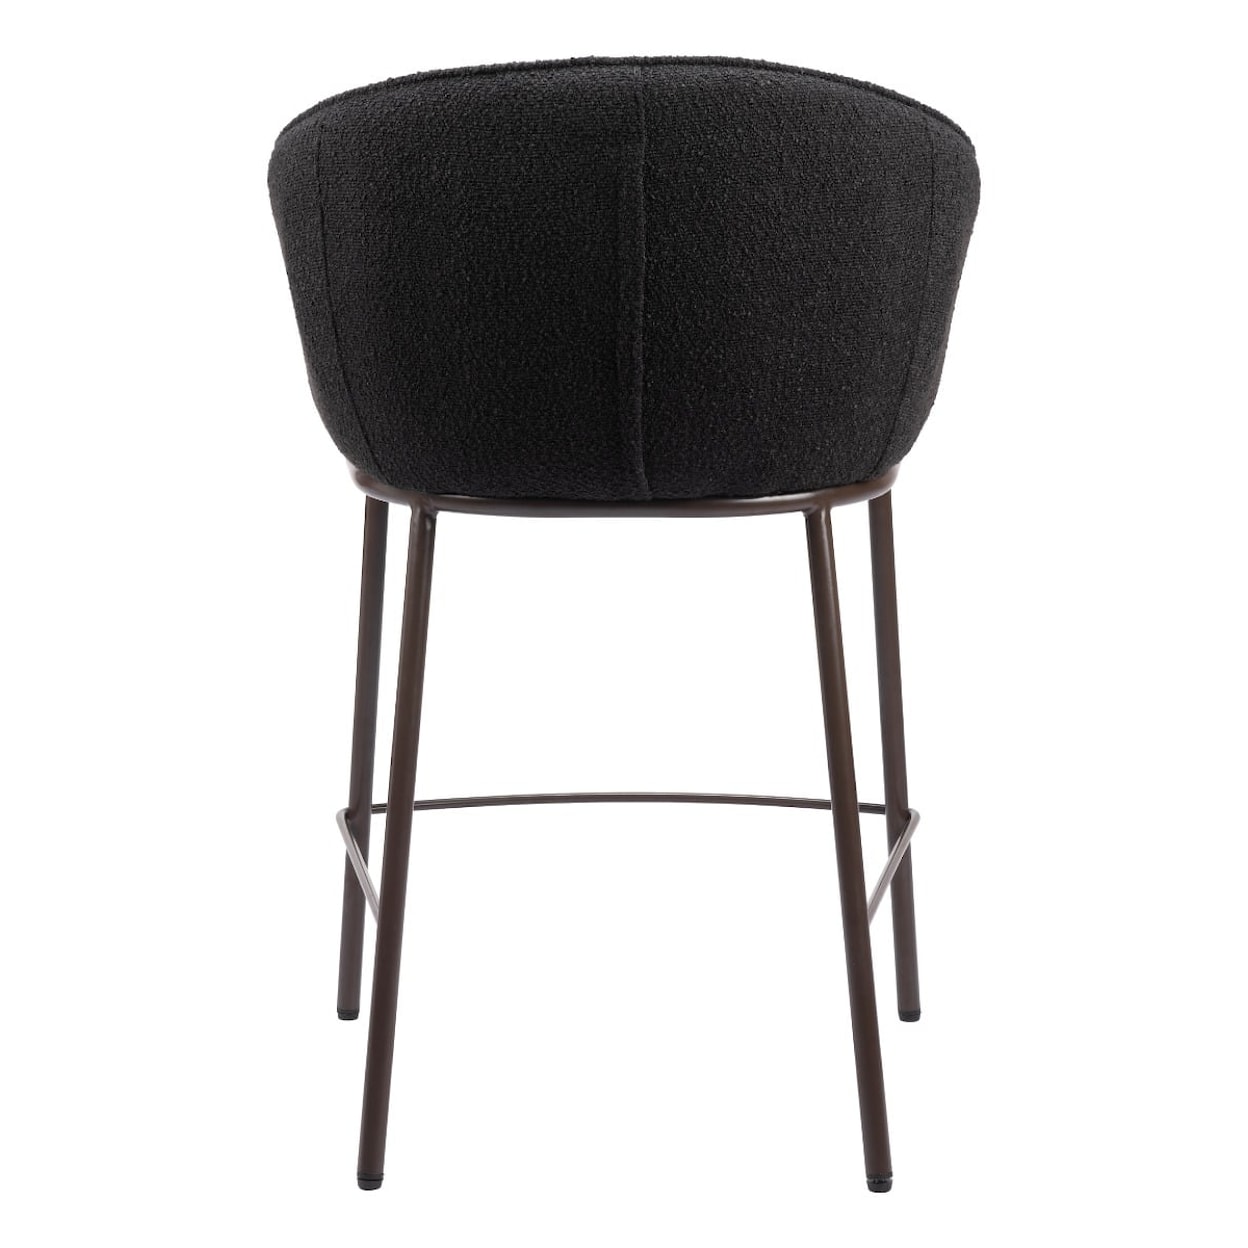 Zuo Essen Collection Counter Stool